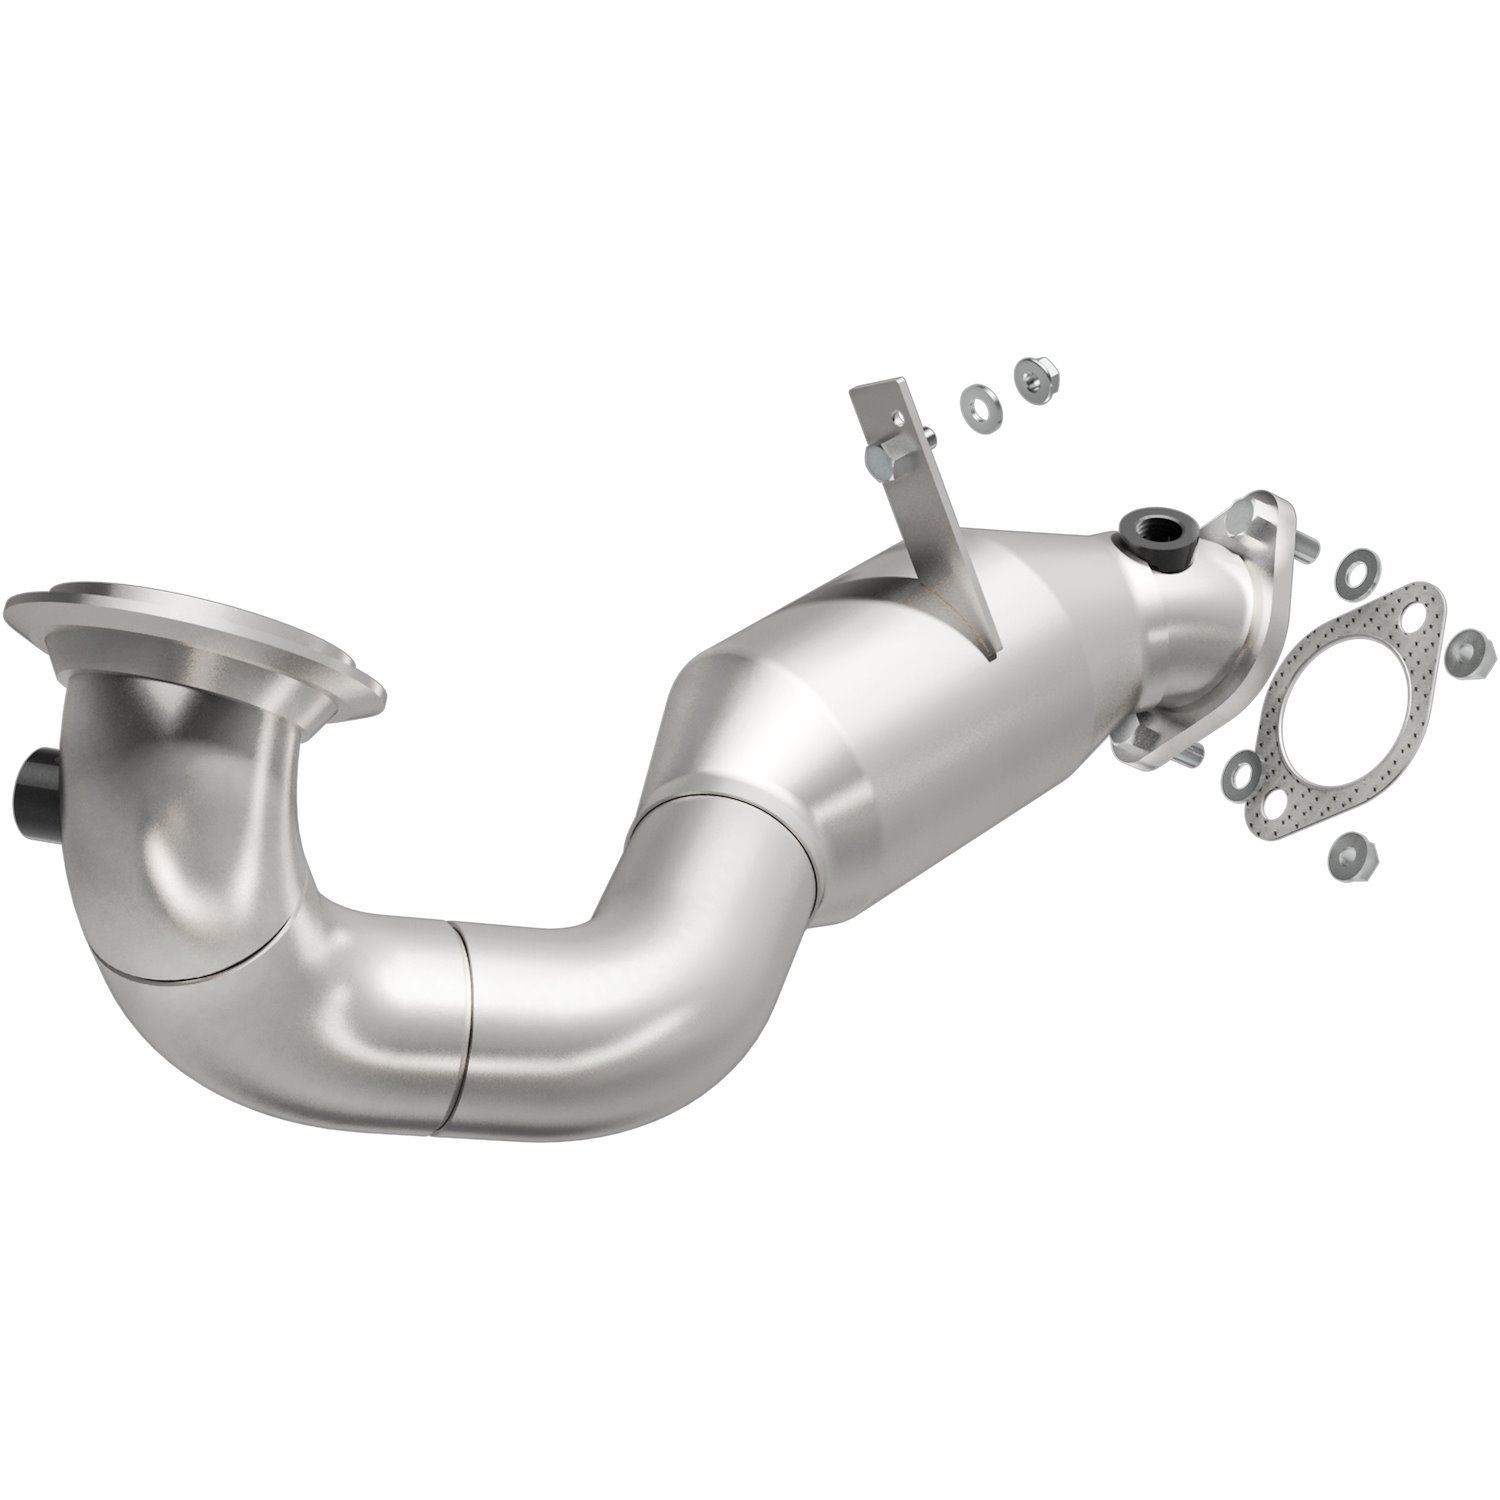 Direct-Fit Catalytic Converter 2007-08 BMW 335i/xi 3.0L Twin Turbo (Rear)